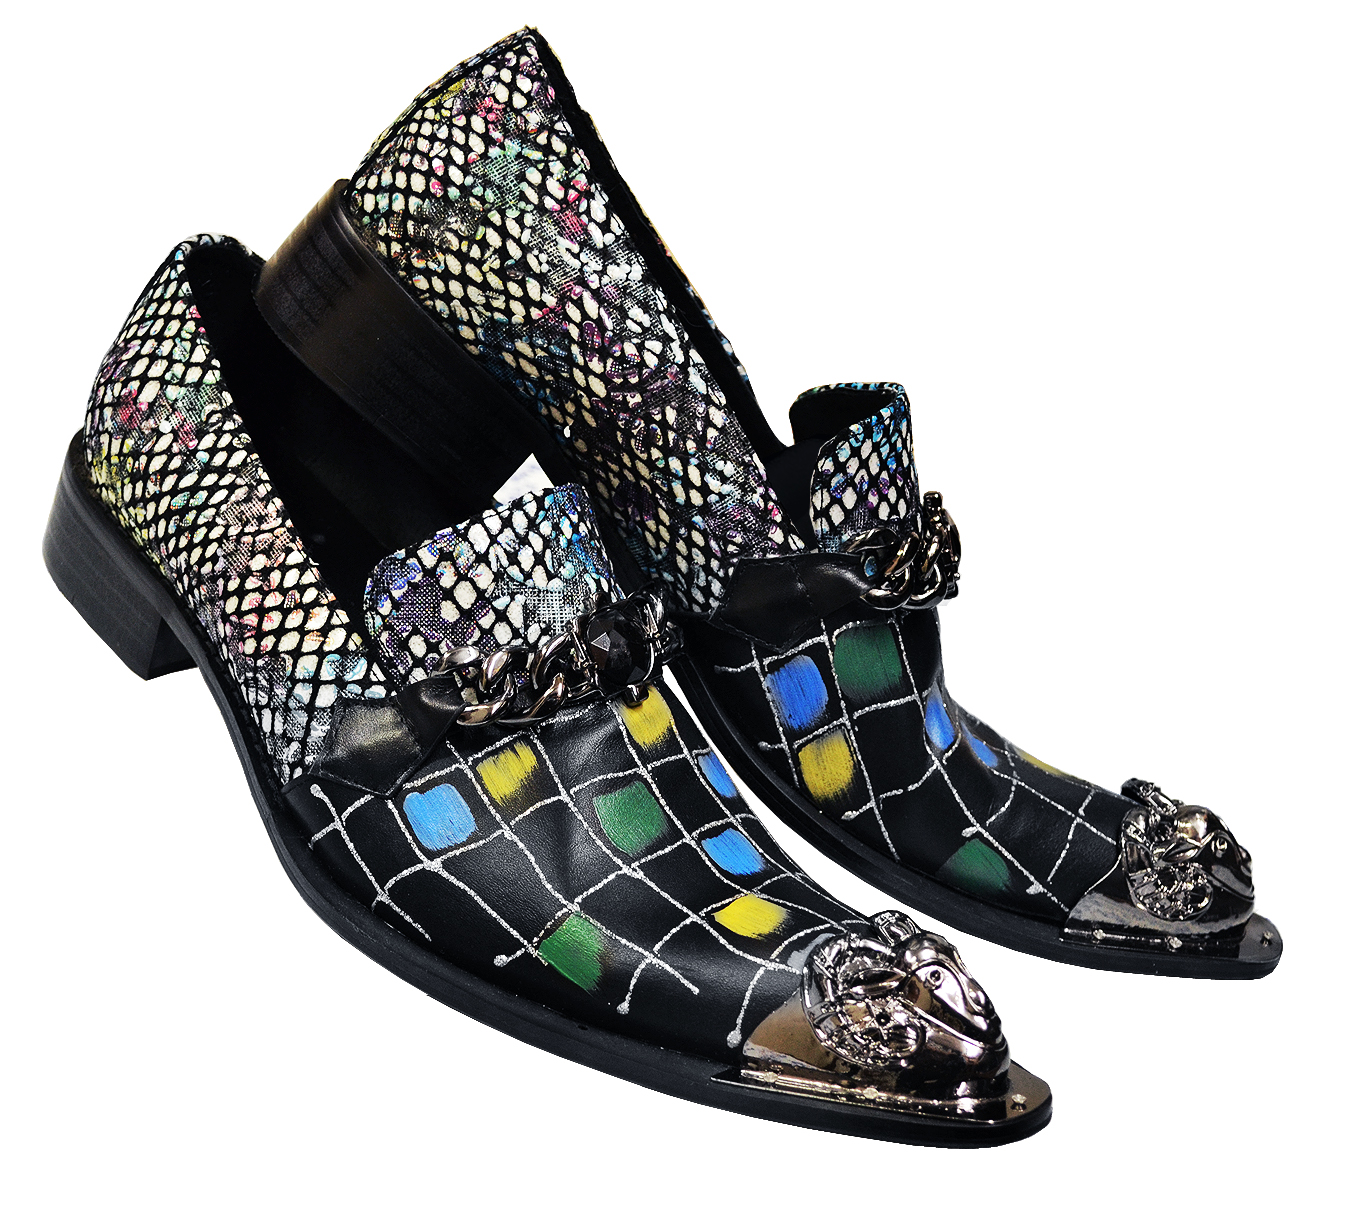 Fiesso Black / Multicolor Hand Painted Lurex Genuine Leather Slip On Shoes With Bracelet / Metal Toe FI6950.